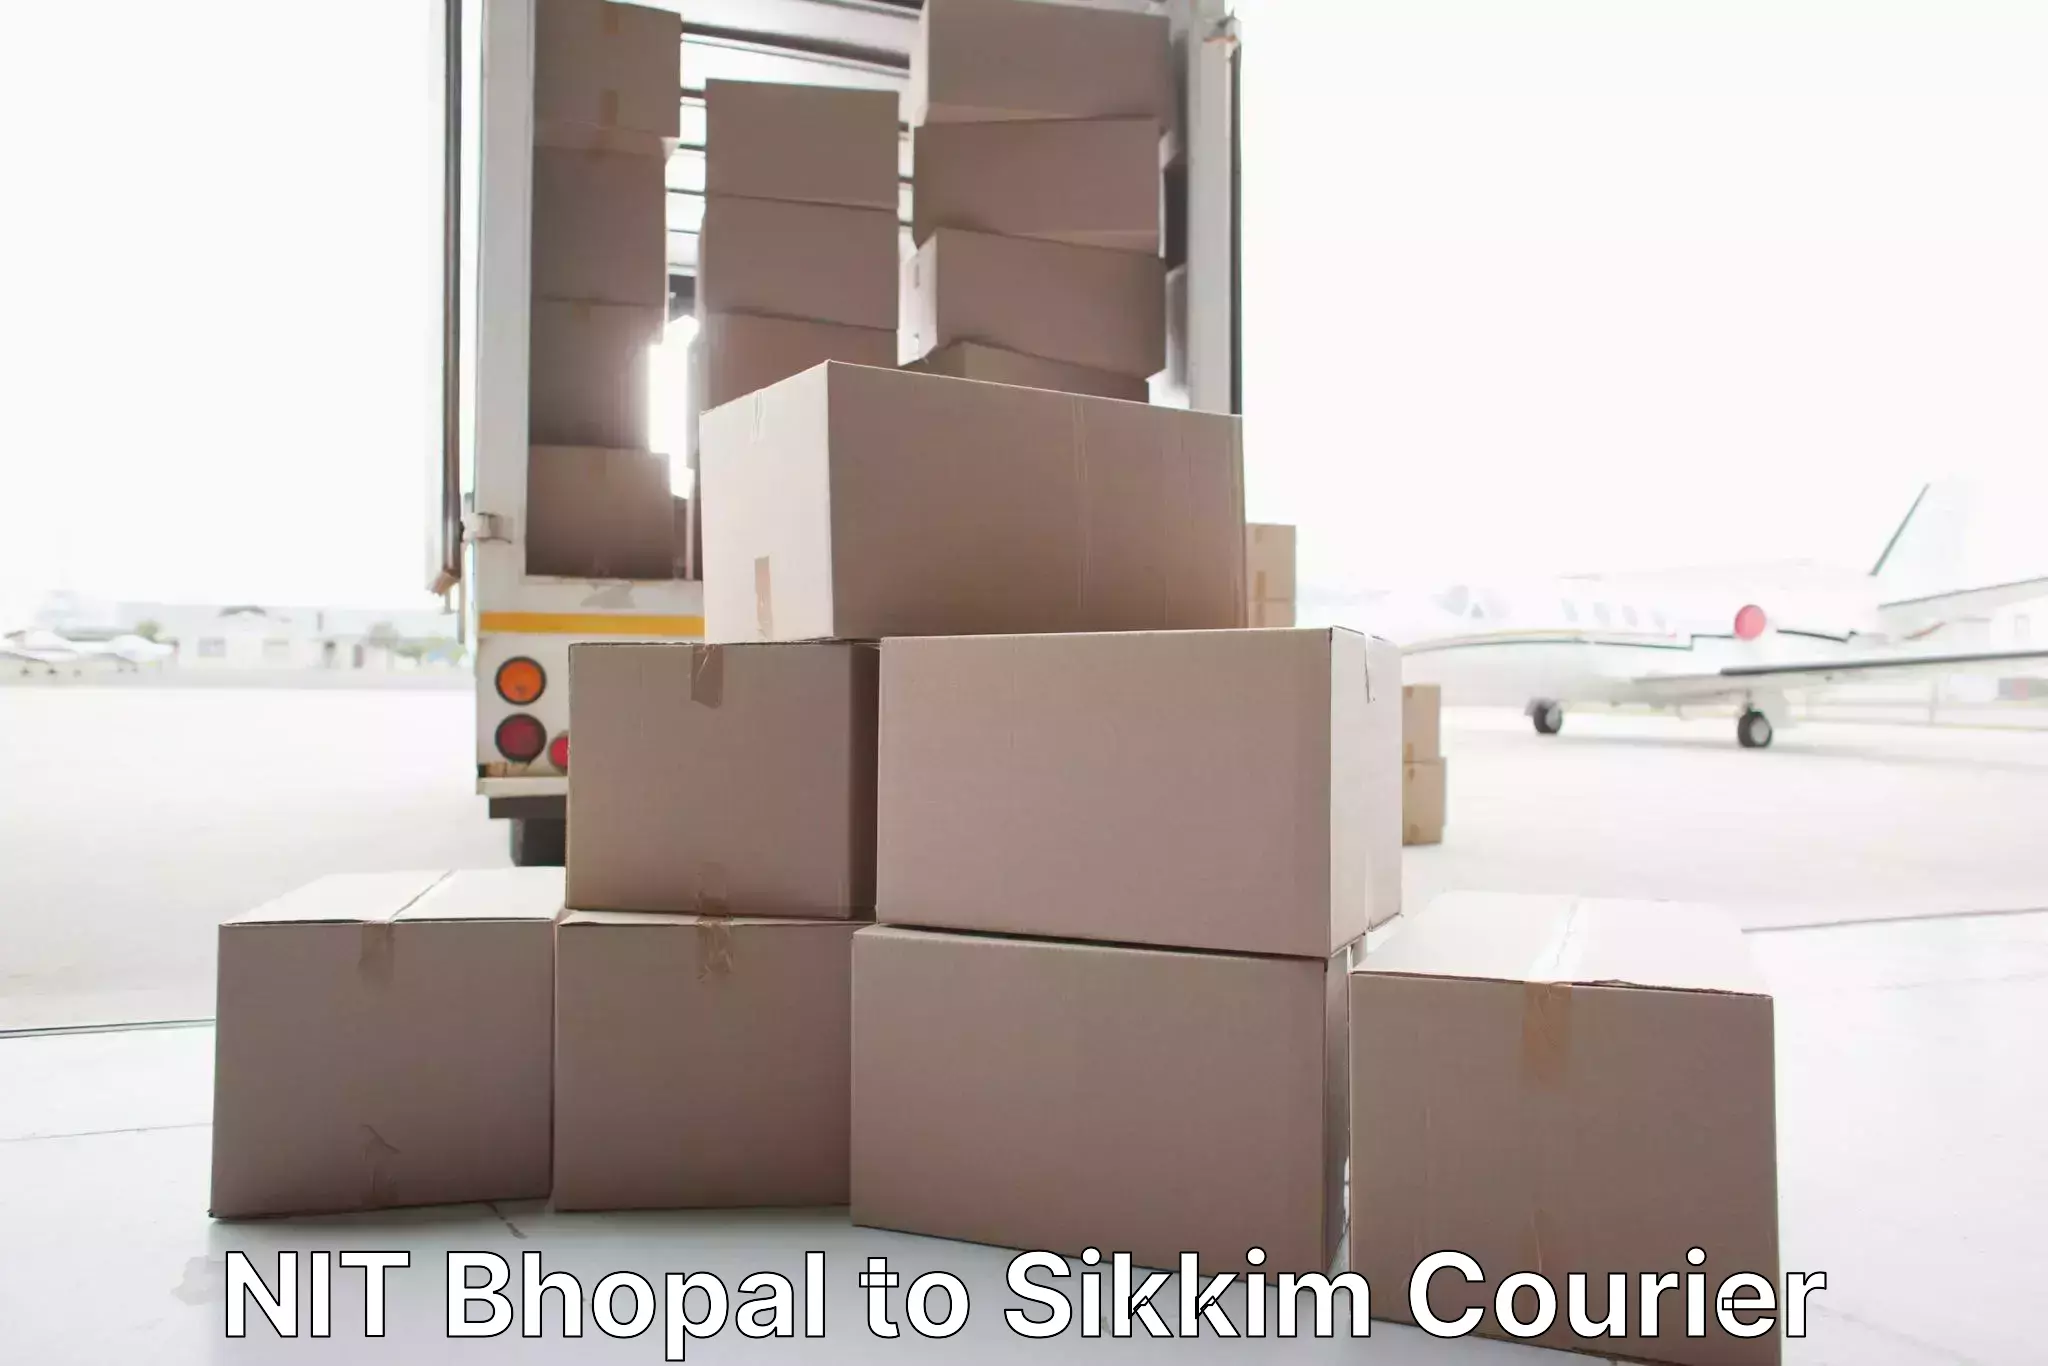 Quality relocation services NIT Bhopal to Namchi